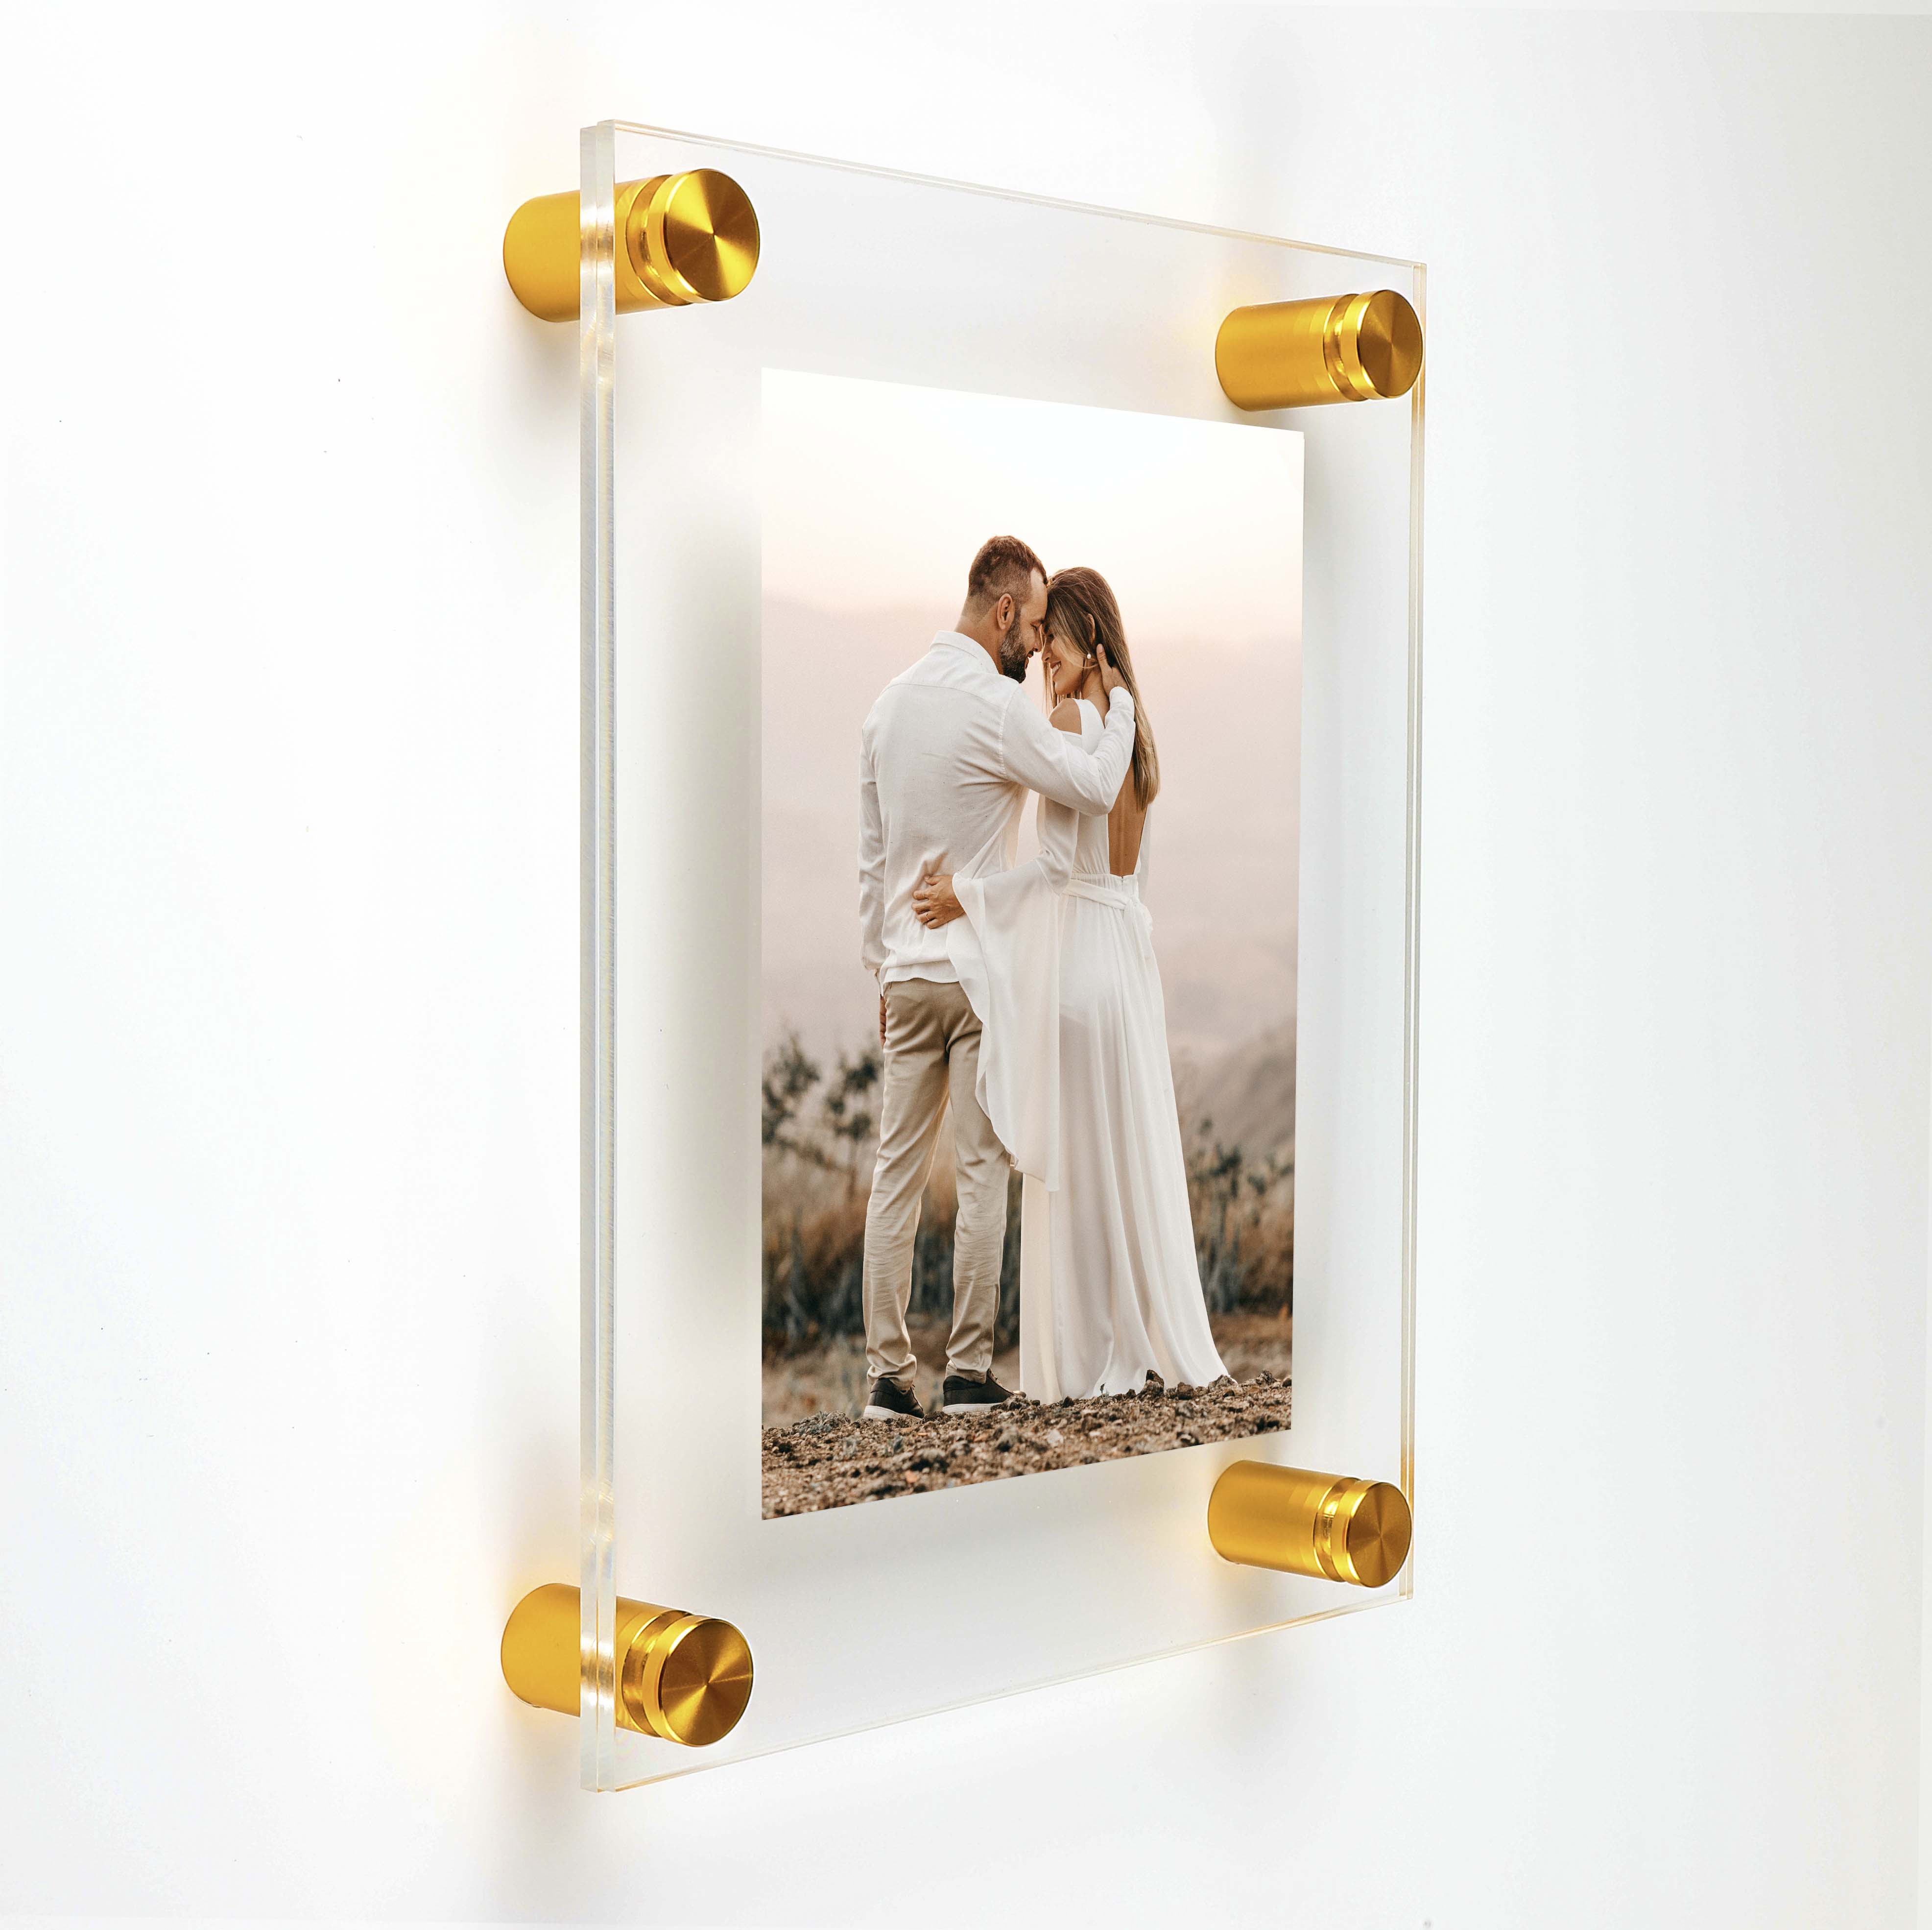 (2) 27'' x 39'' Clear Acrylics , Pre-Drilled With Polished Edges (Thick 3/16'' each), Wall Frame with (6) 1'' x 1'' Gold Anodized Aluminum Standoffs includes Screws and Anchors